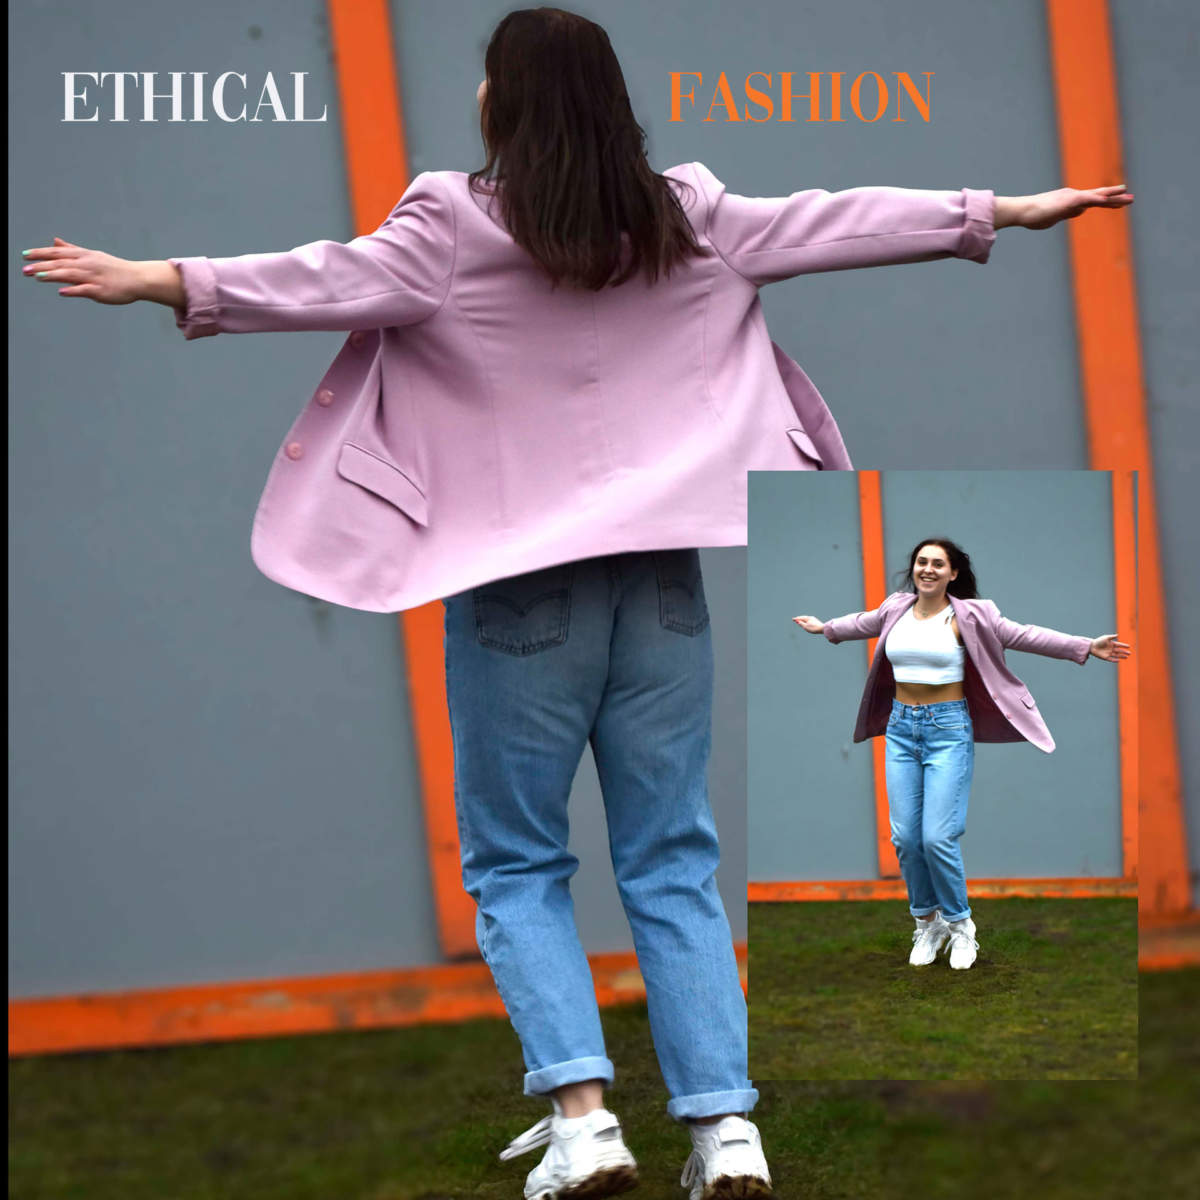 two images on ethical fashion